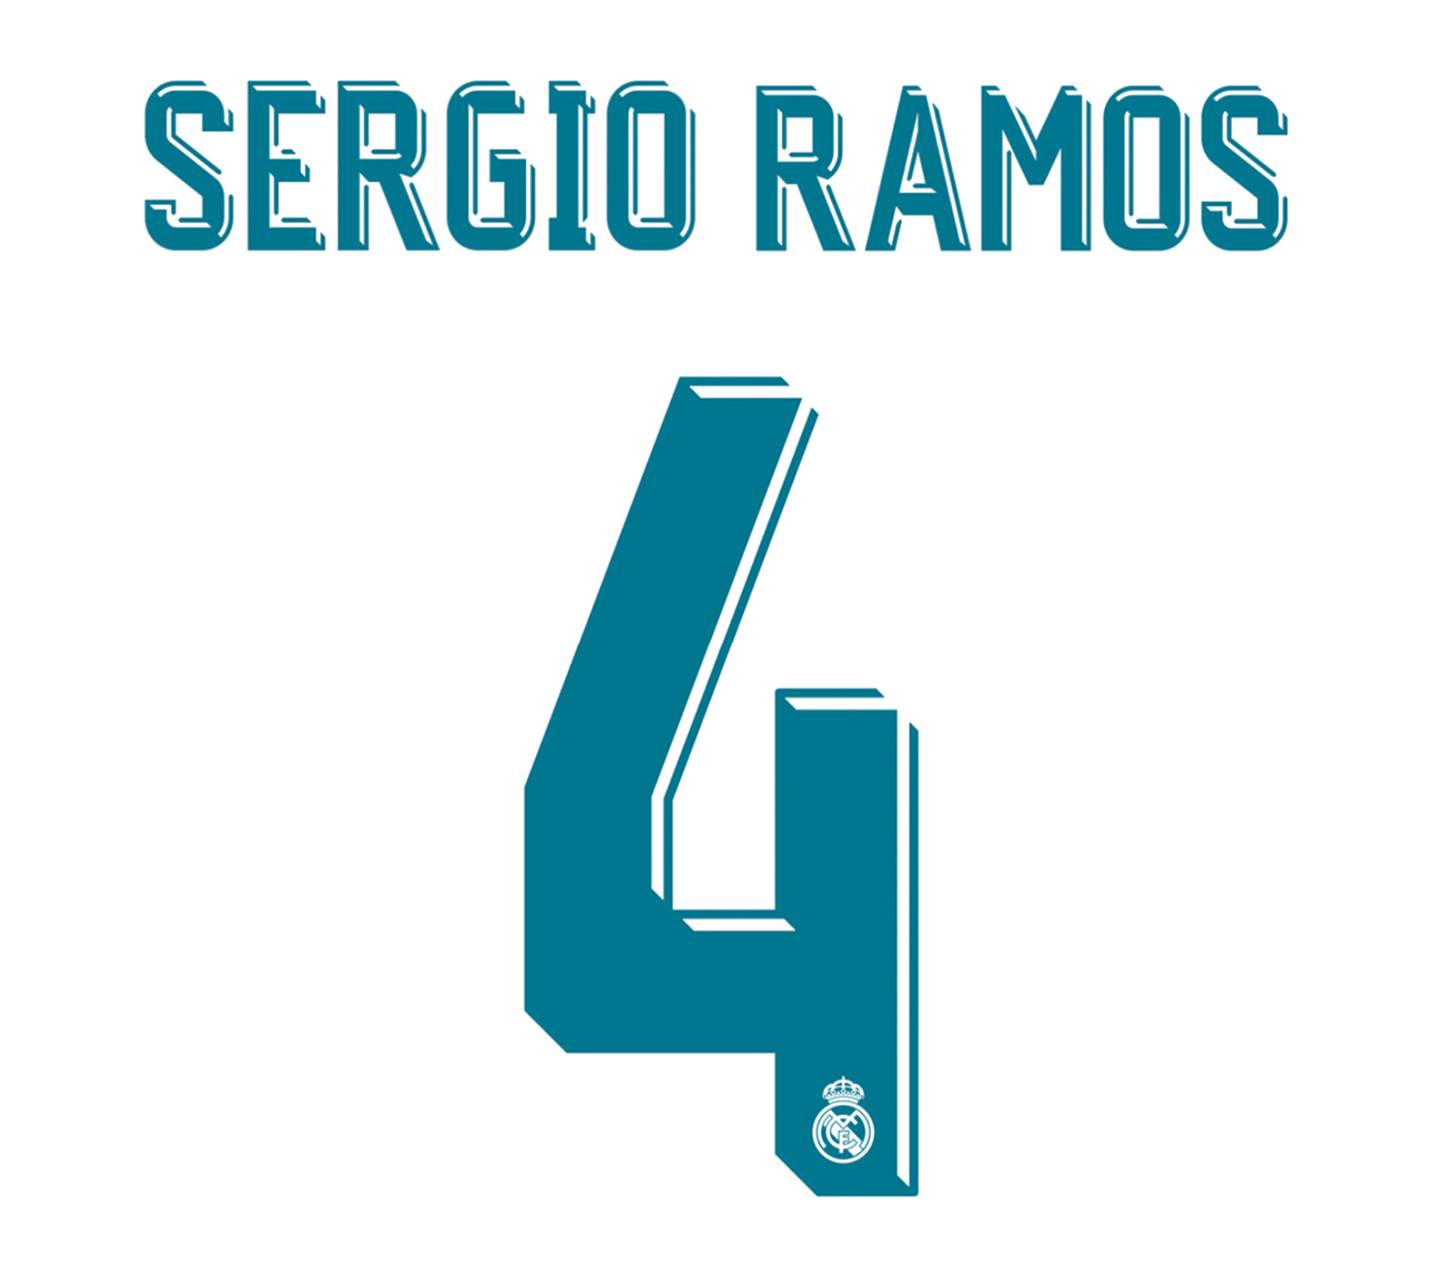 Download free sergio ramos wallpaper for your mobile phone